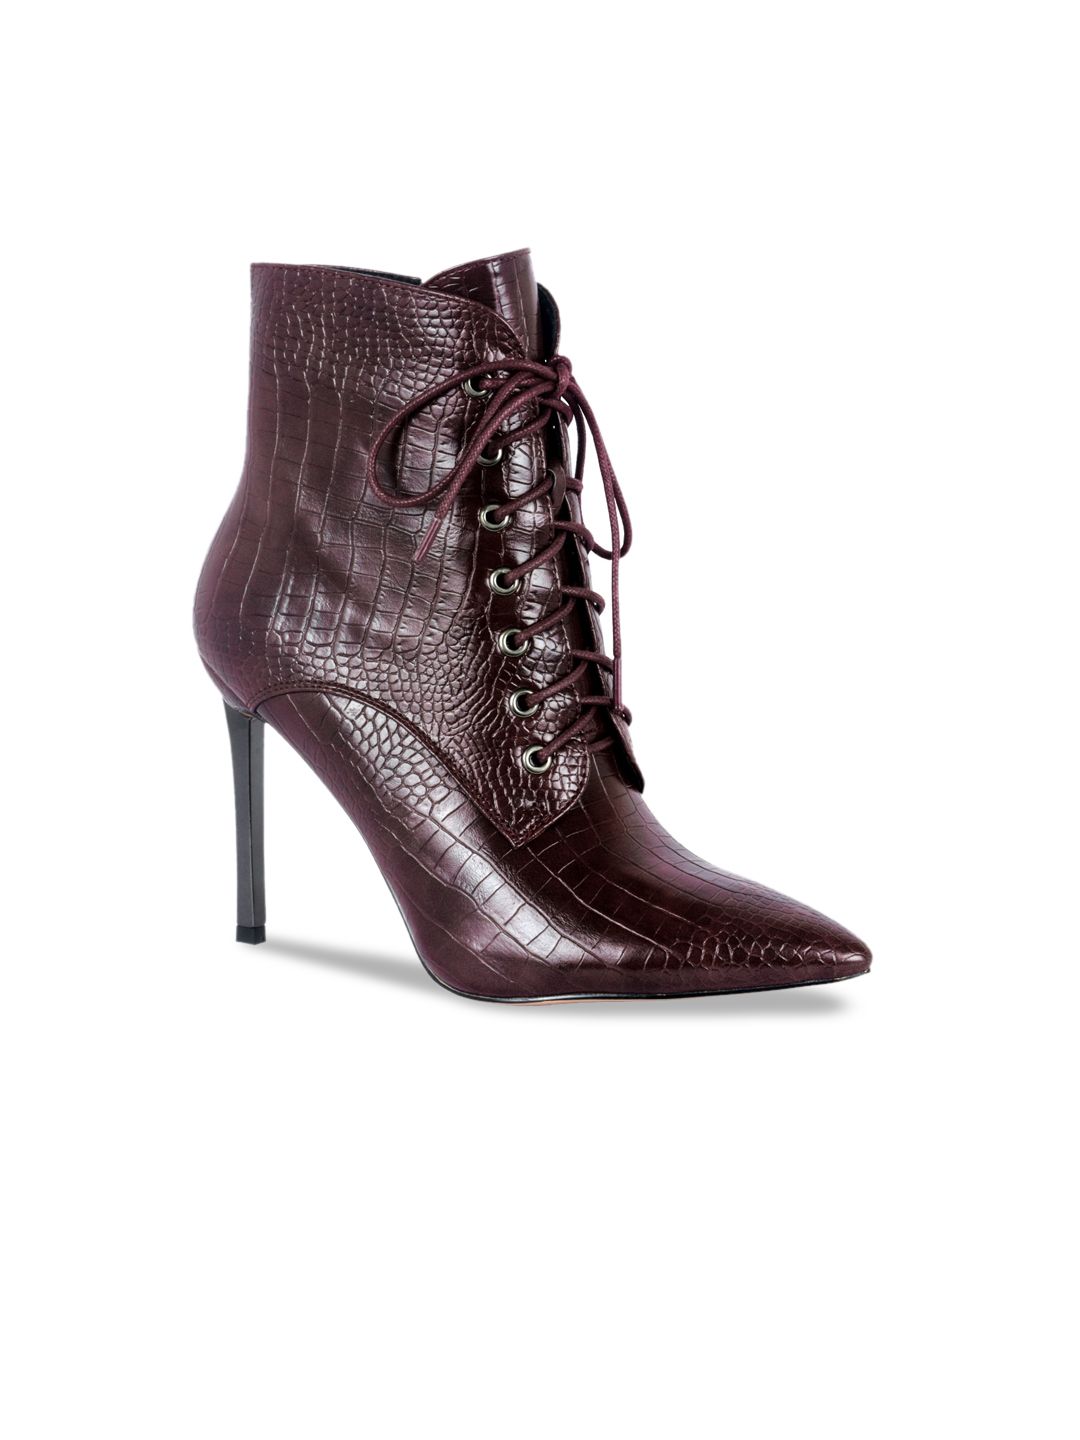 London Rag Burgundy Textured PU Party Stiletto Heeled Boots Price in India